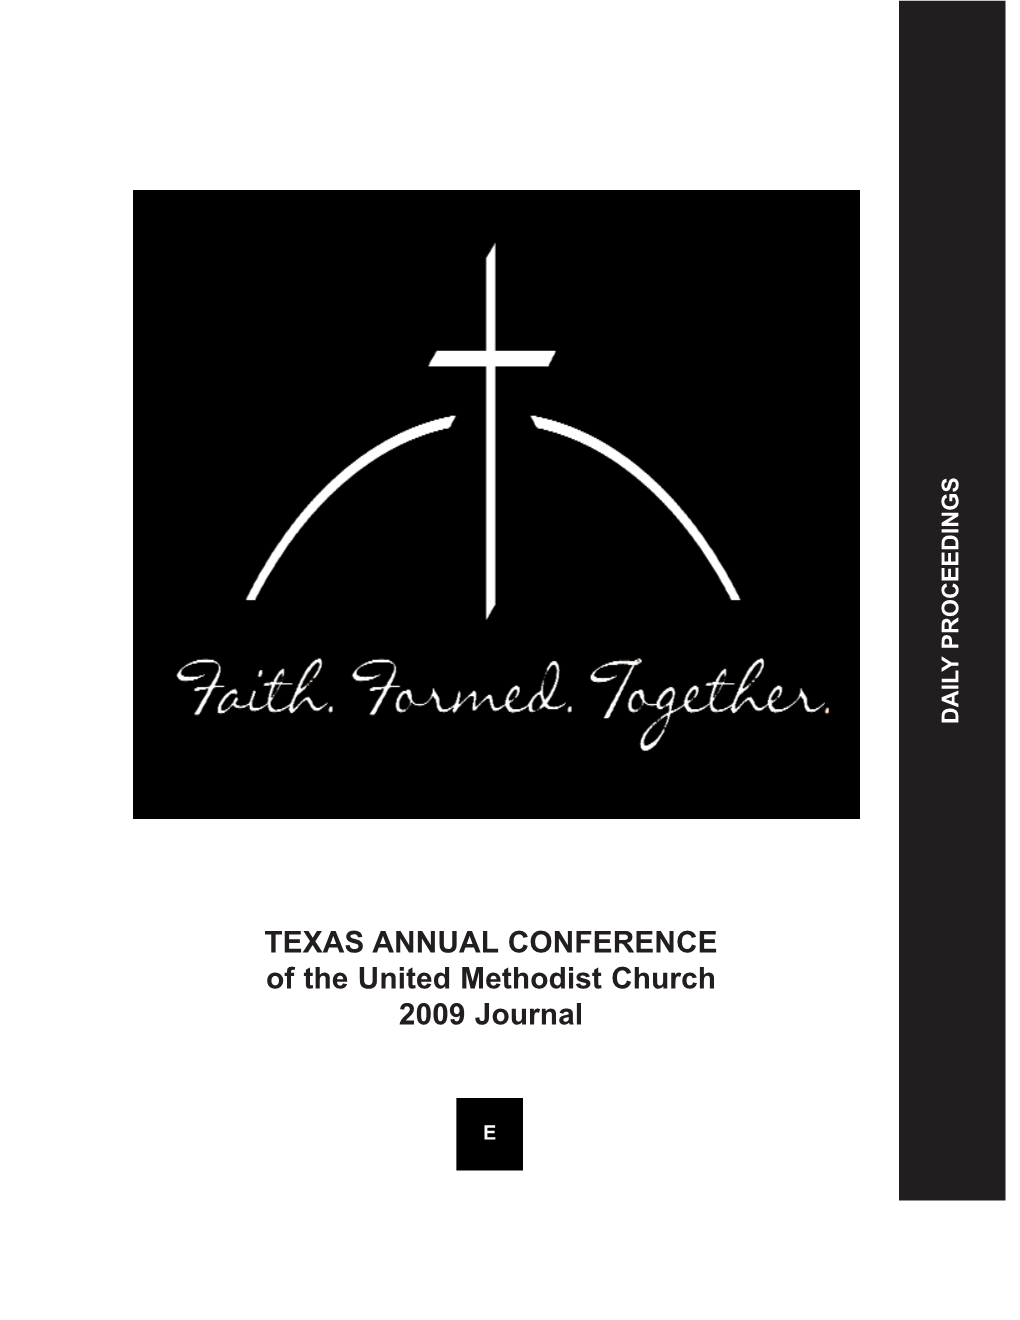 TEXAS ANNUAL CONFERENCE of the United Methodist Church 2009 Journal